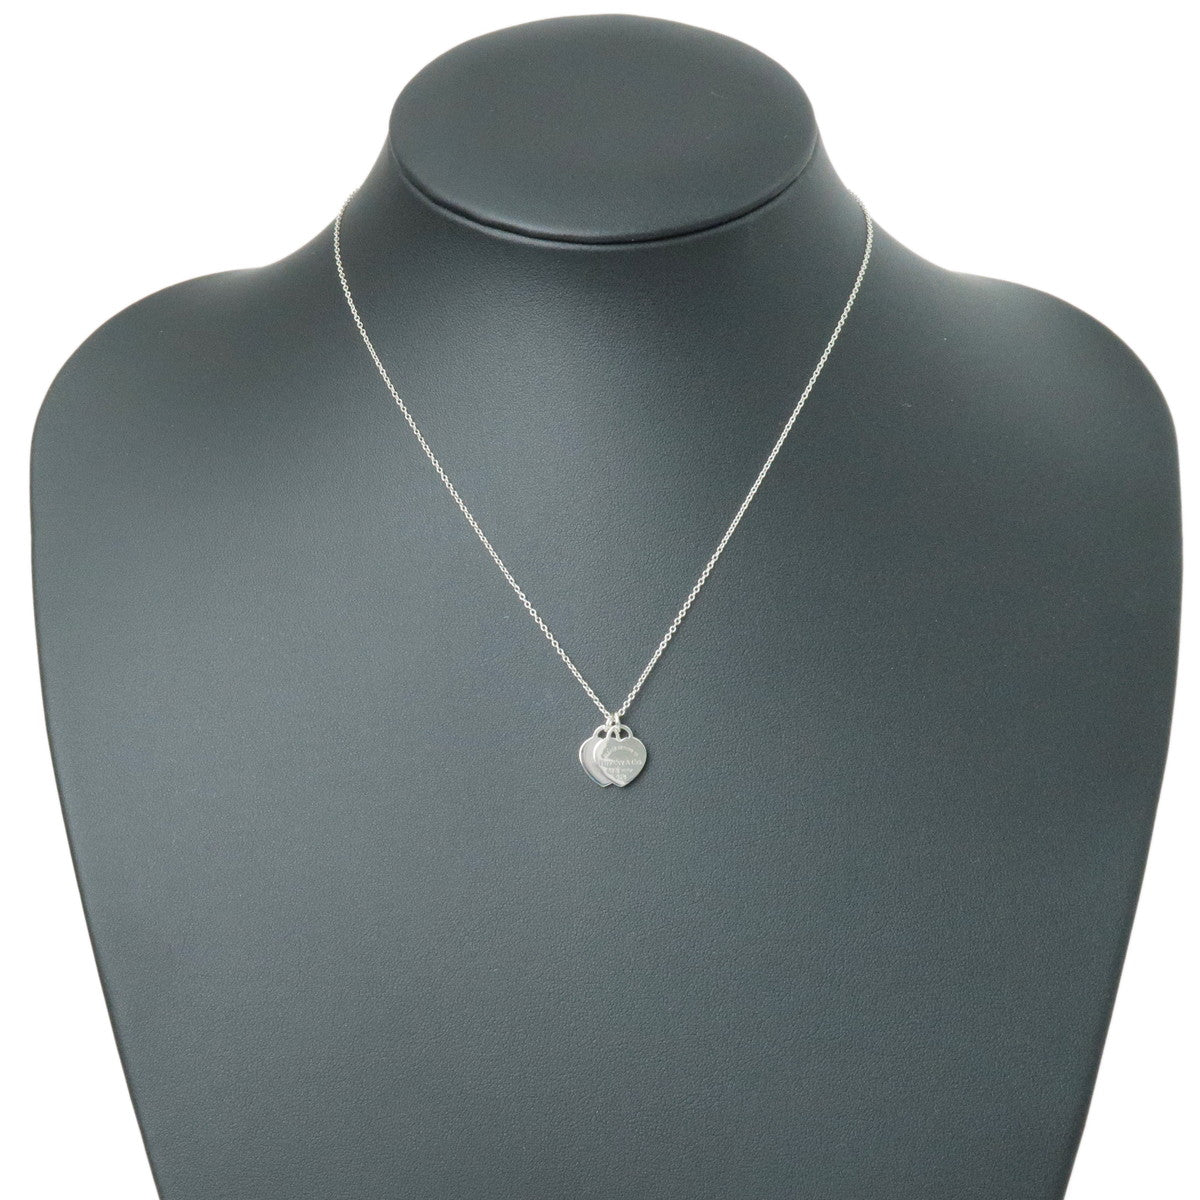 TIFFANY & CO - Return to Tiffany heart tag in sterling silver on a bead  necklace | Selfridges.com